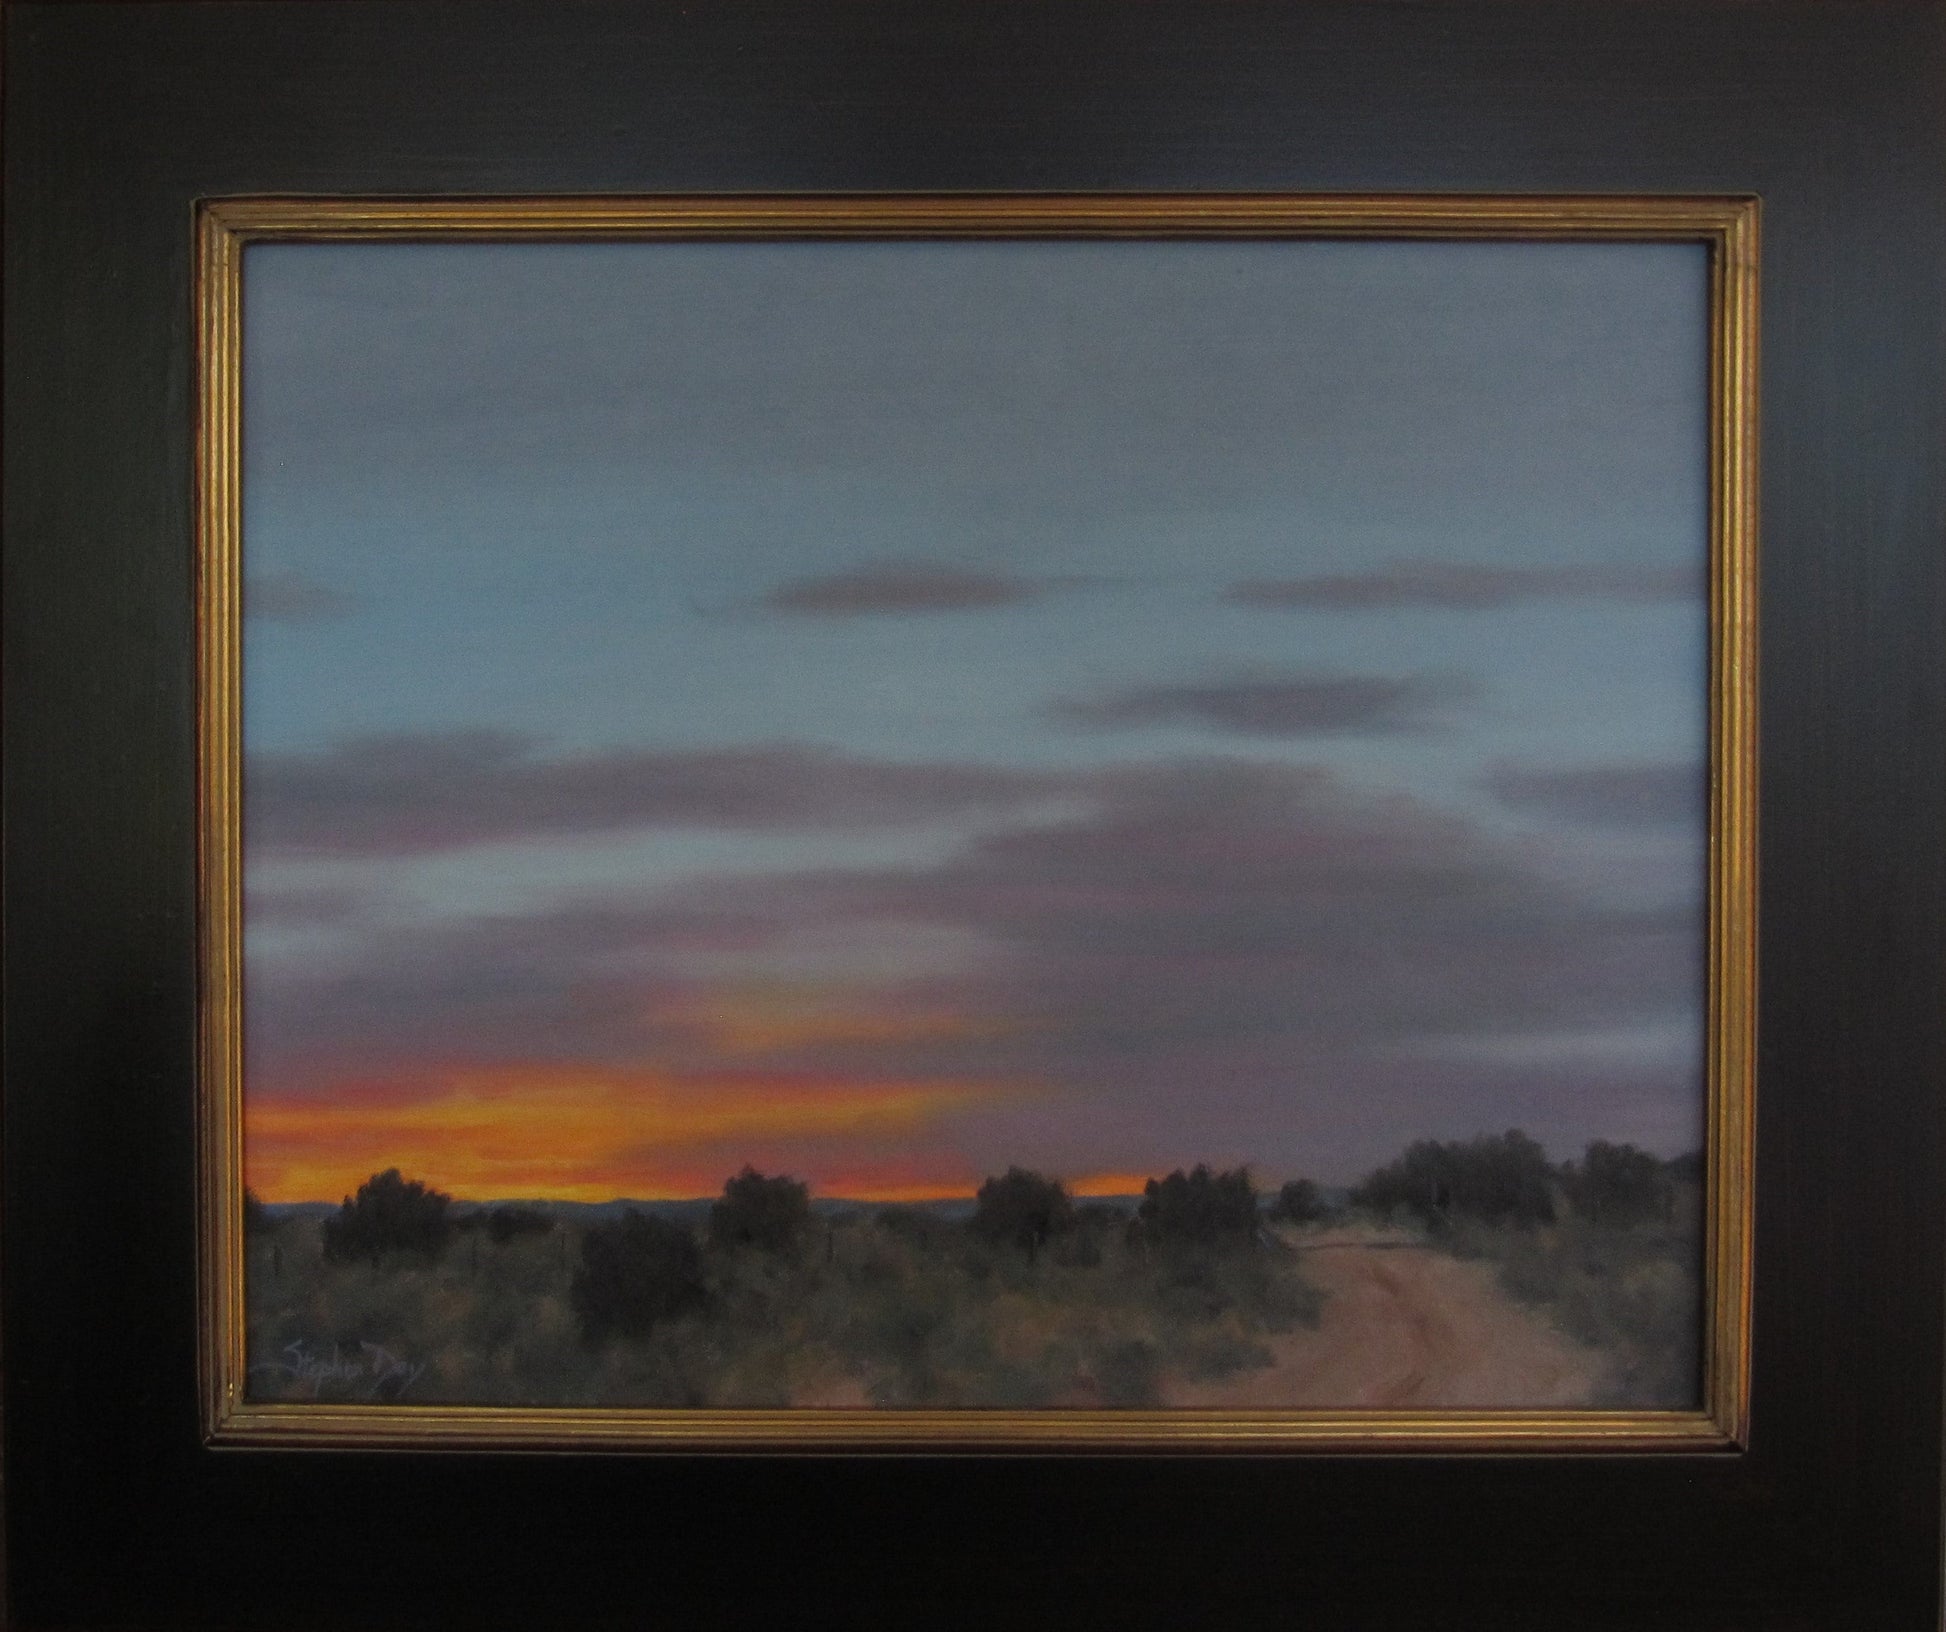 Ranch Gate Evening-Painting-Stephen Day-Sorrel Sky Gallery